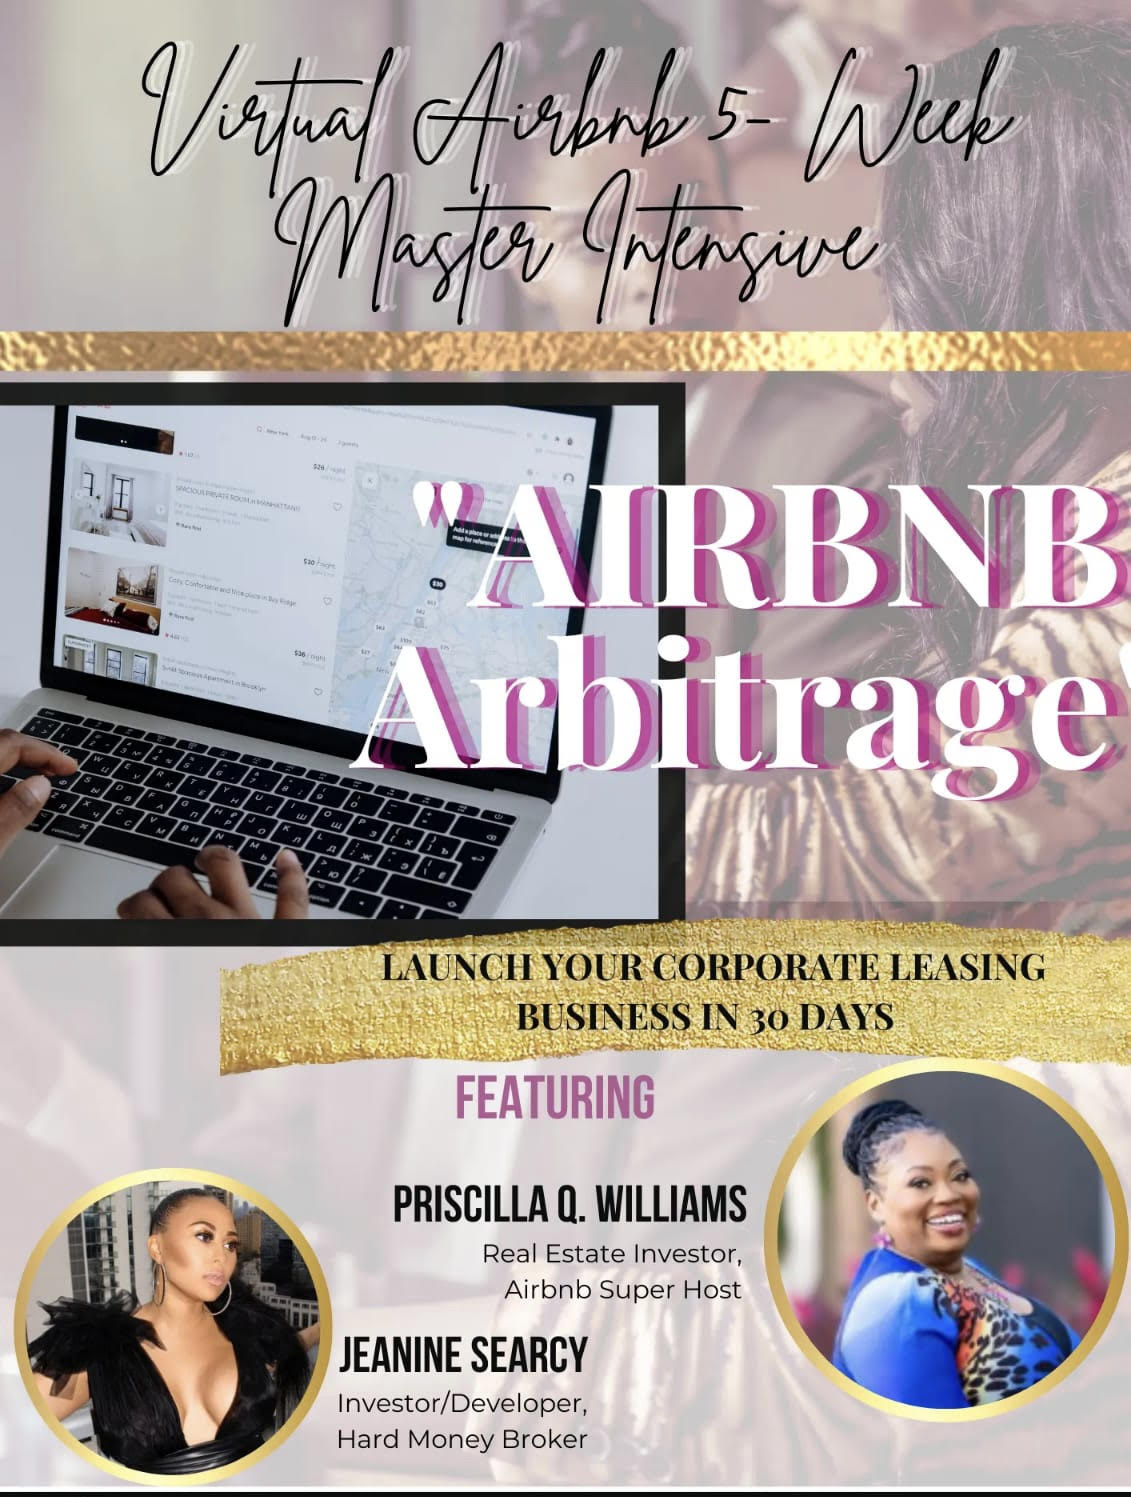 Launch Your Airbnb Arbitrage Business in 30 days - 5 Week Virtual Intensive Class